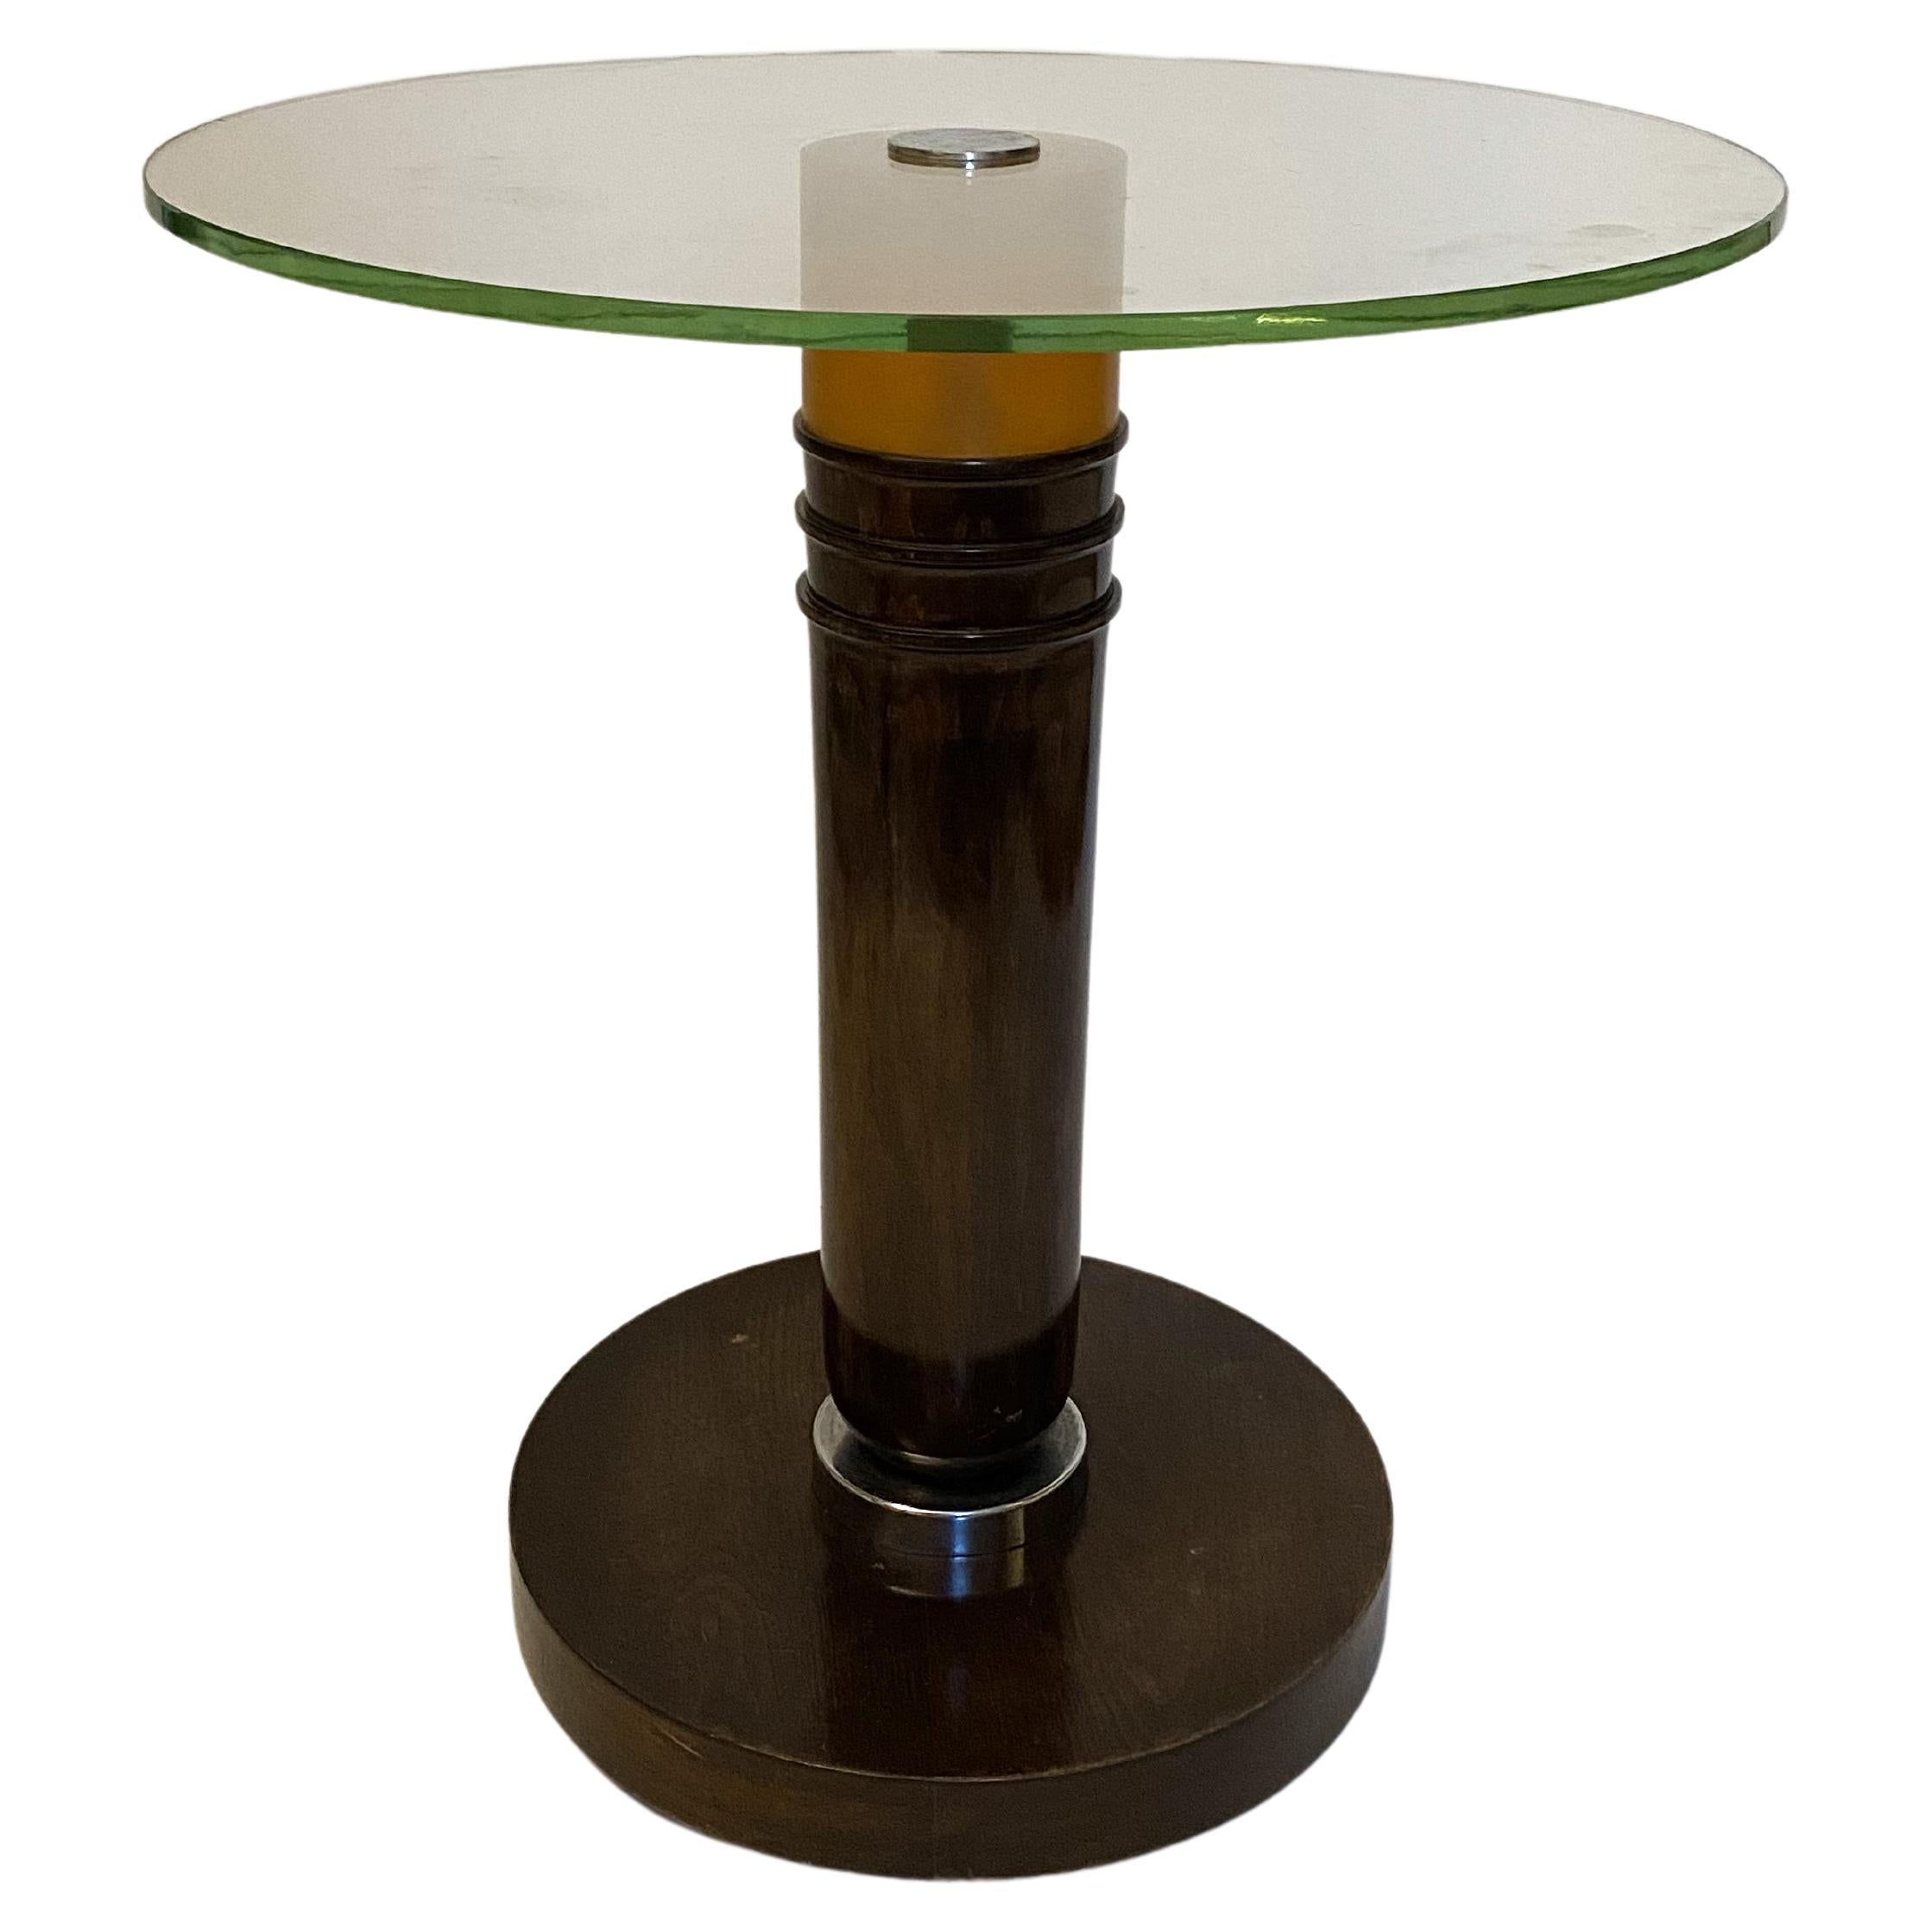 Modernist French Art Deco Side Table in the Style of Djo Bourgeois, 1930s For Sale